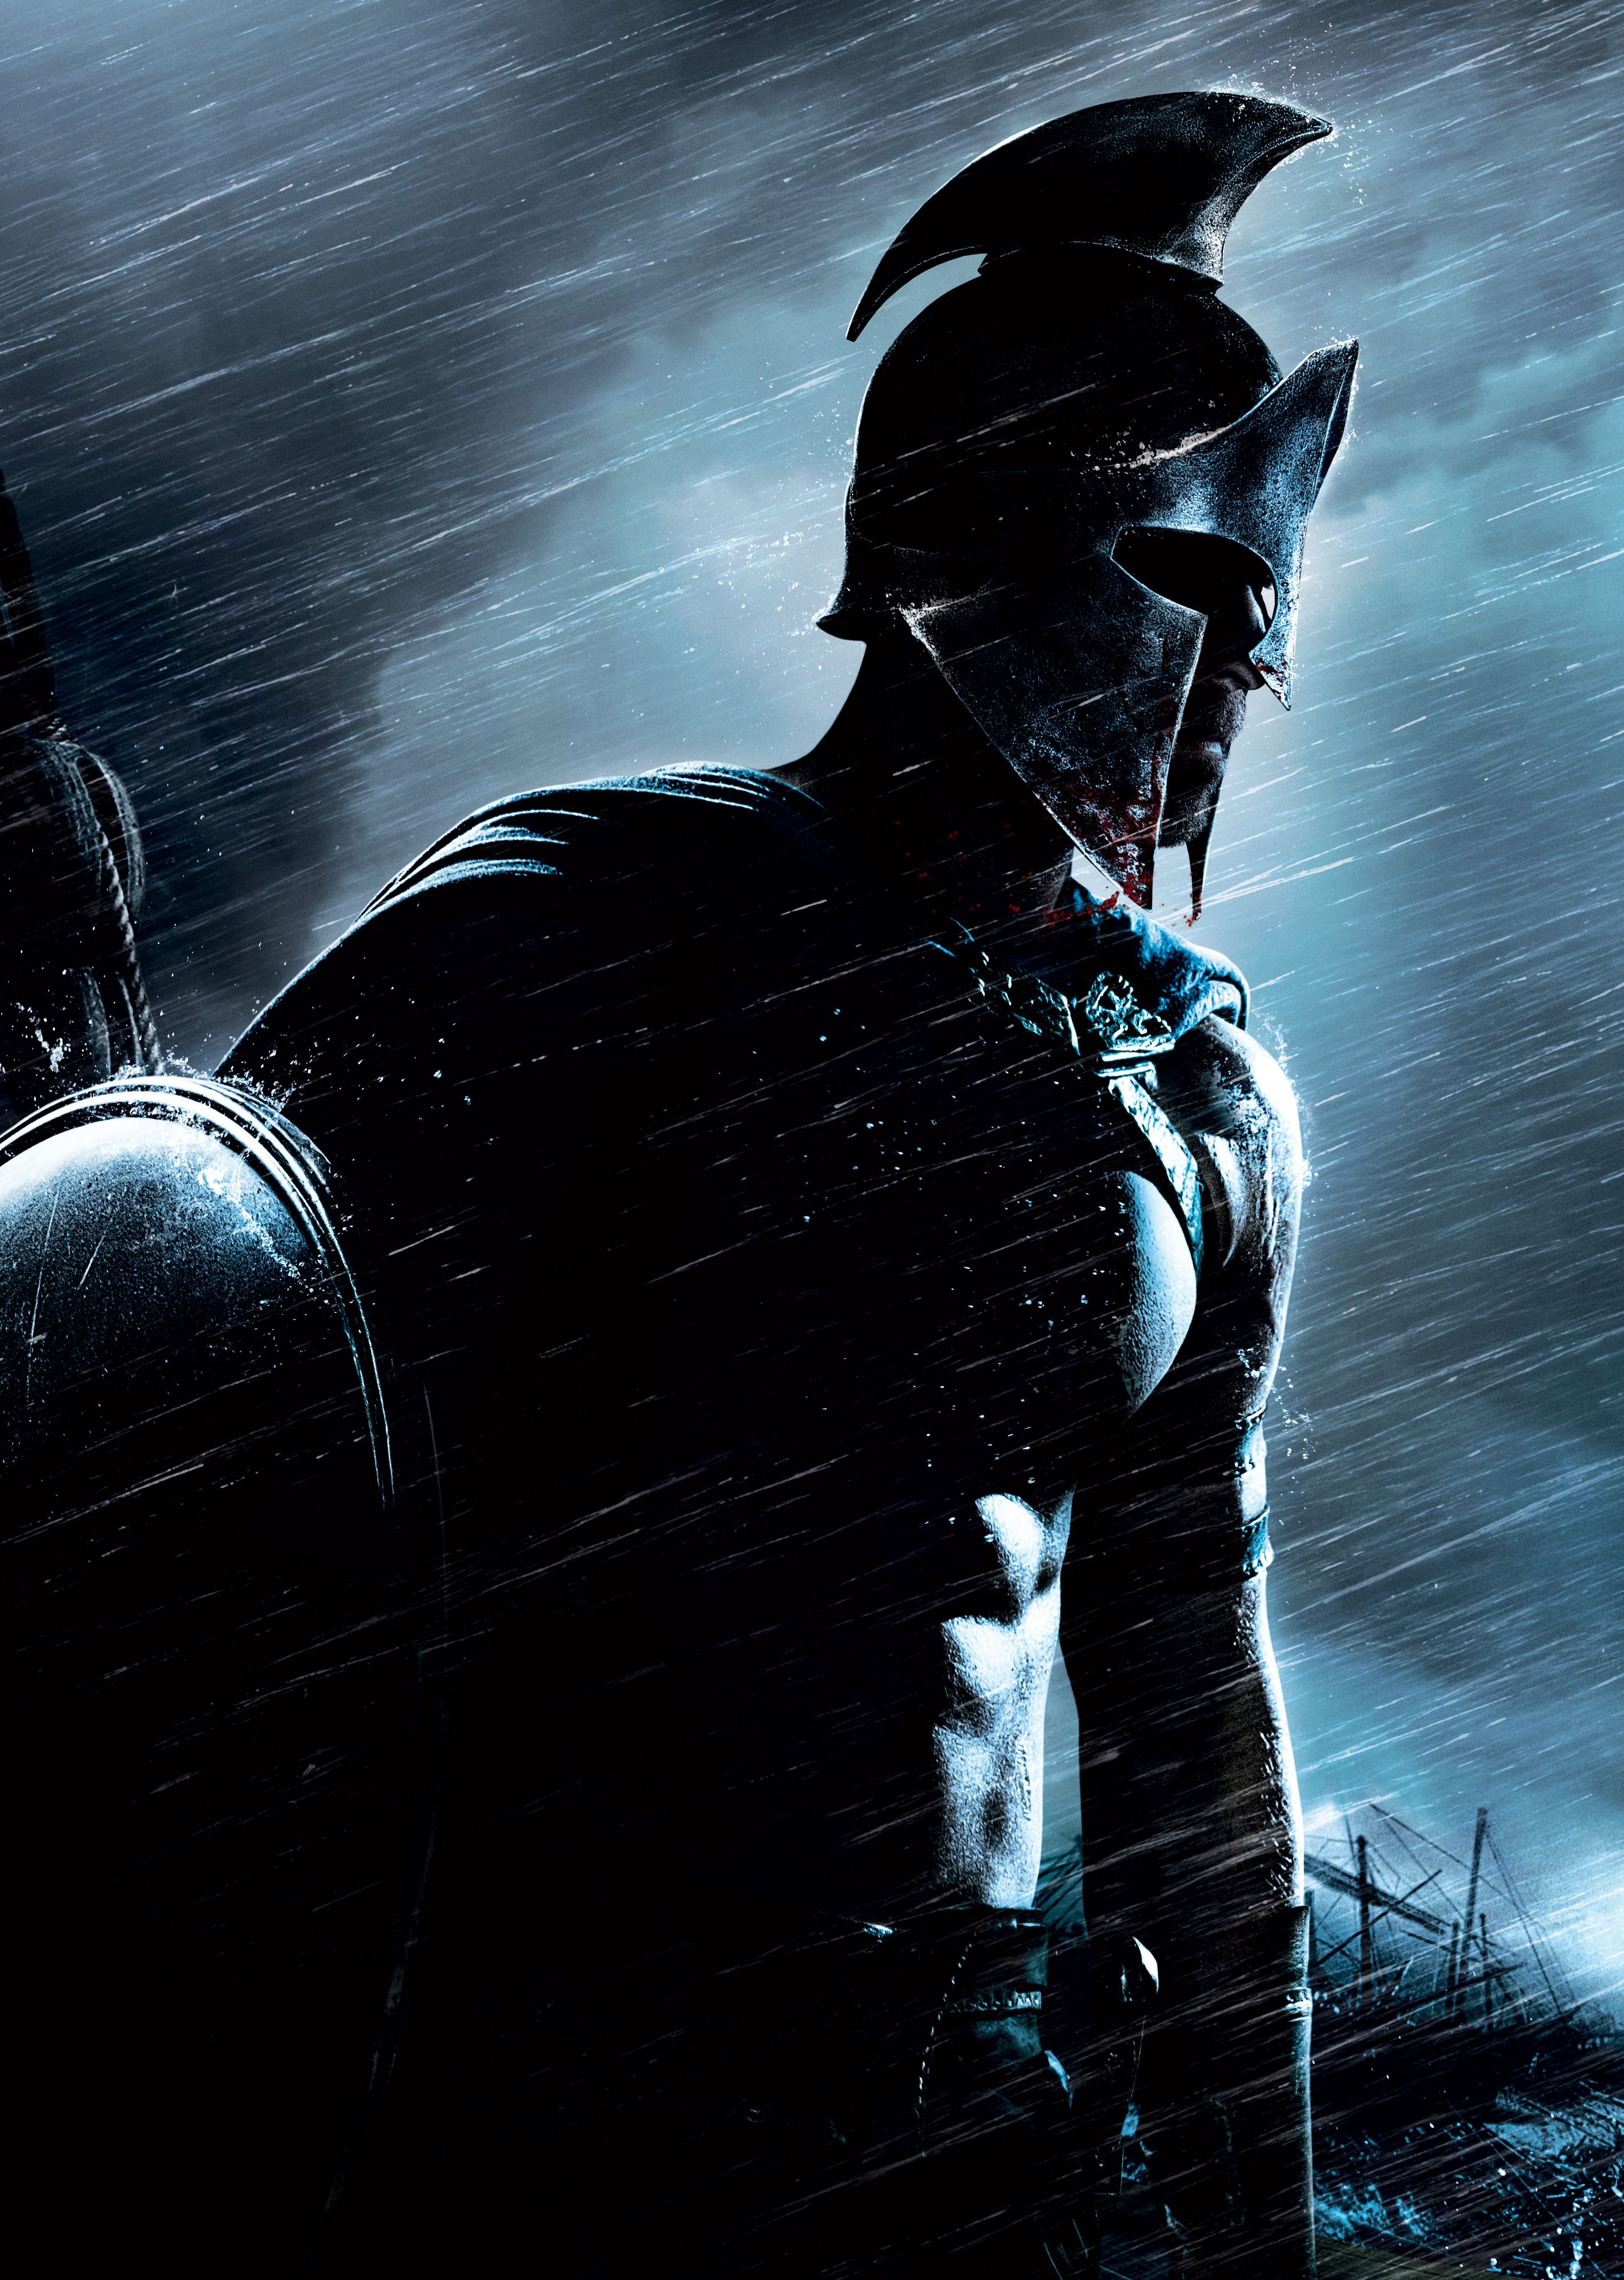 Black armor in 300: Rise of an Empire